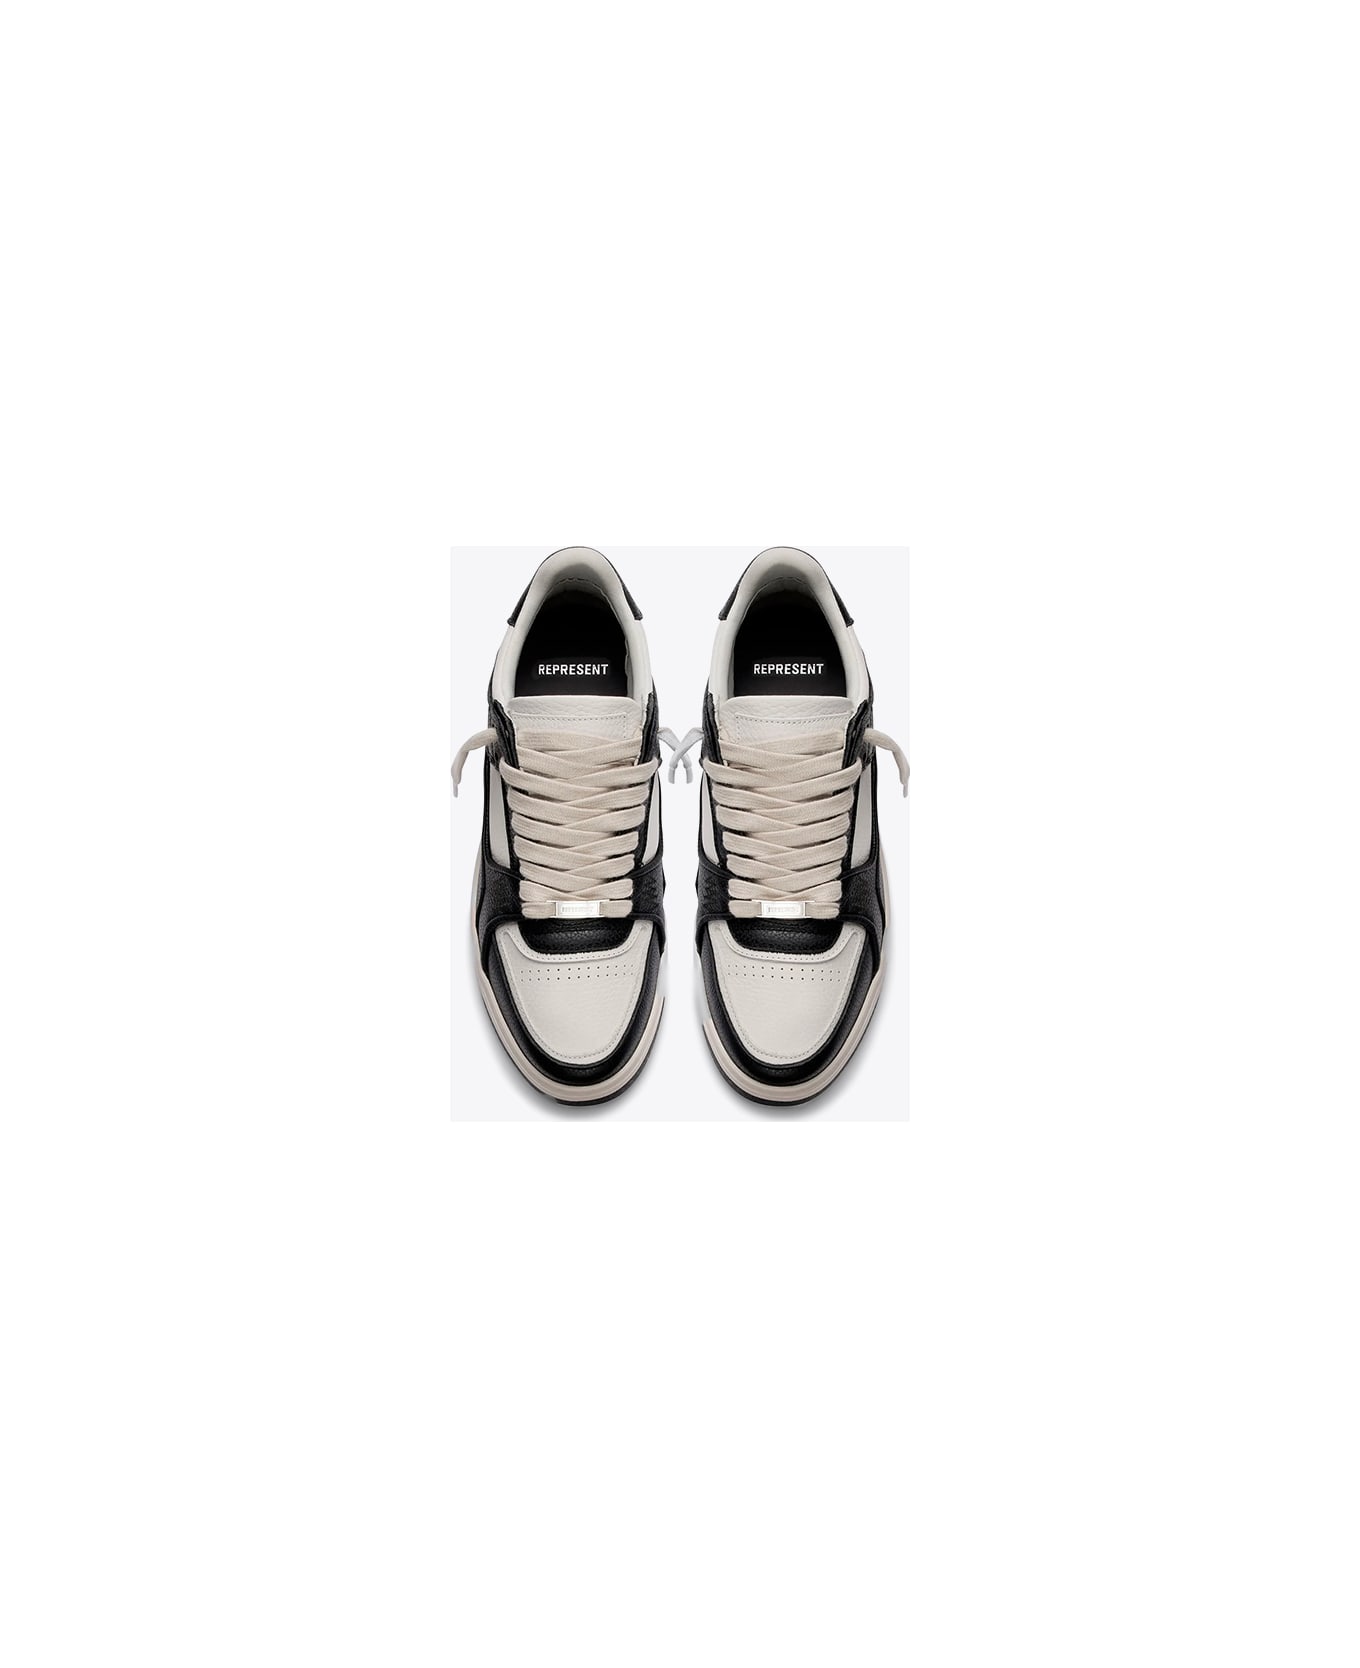 REPRESENT Apex Off White And Black Leather Low Top Sneaker - Apex - Black スニーカー